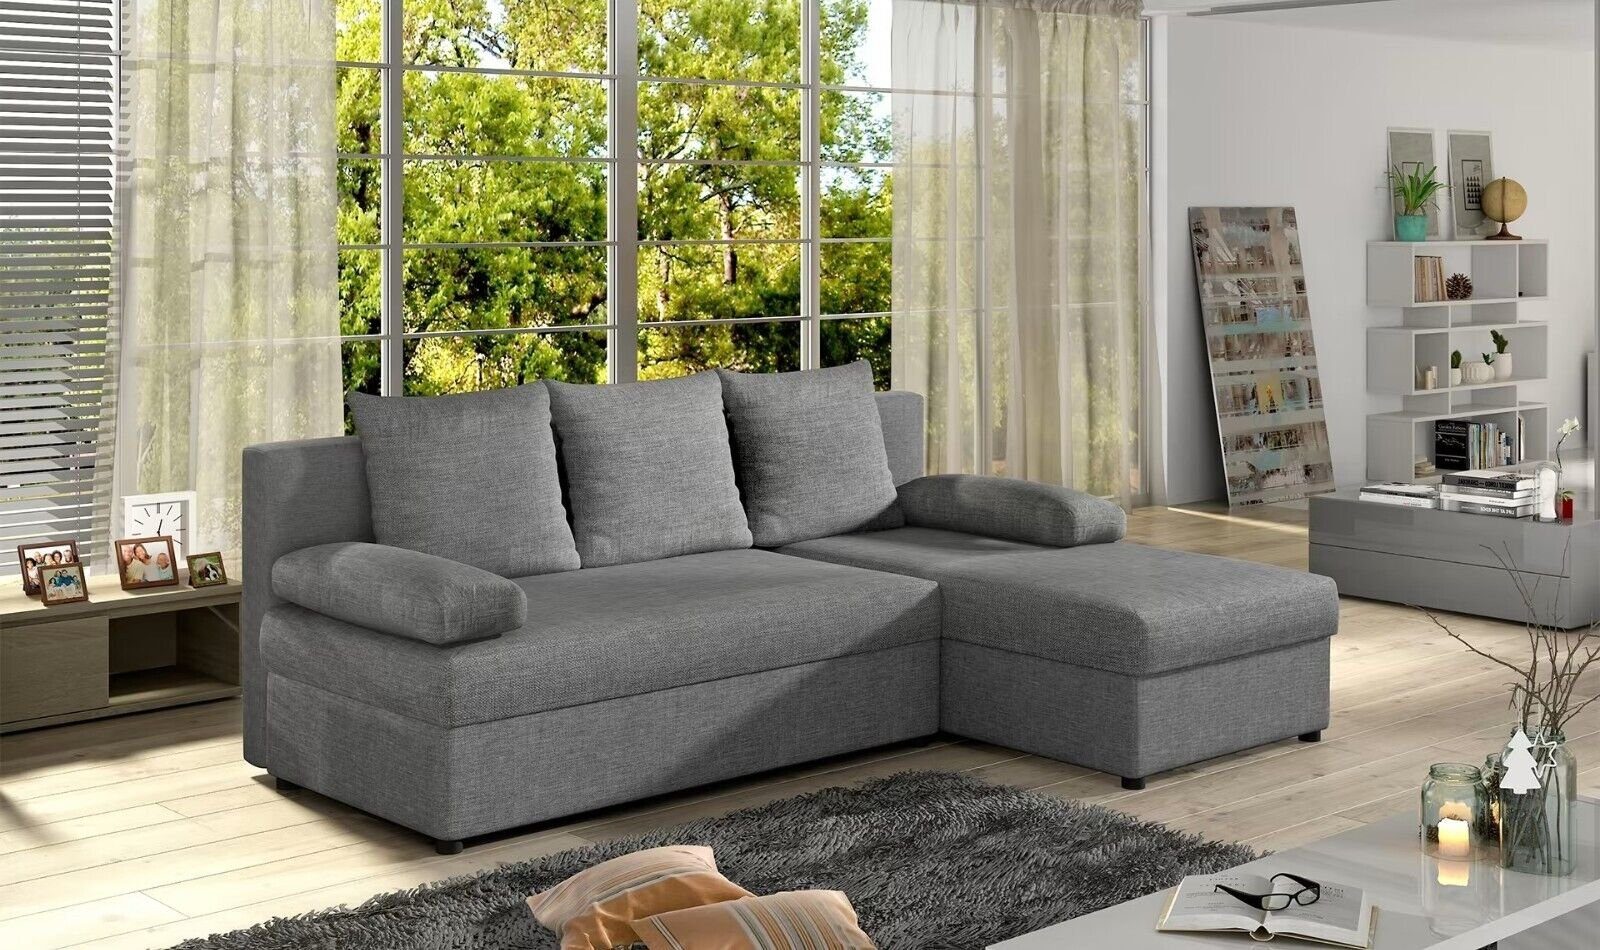 Schlafsofa Europe JVmoebel Sofort, Couch in Couch Design Polster Bettfunktion Sofa Ecksofa Grau Made L-Form